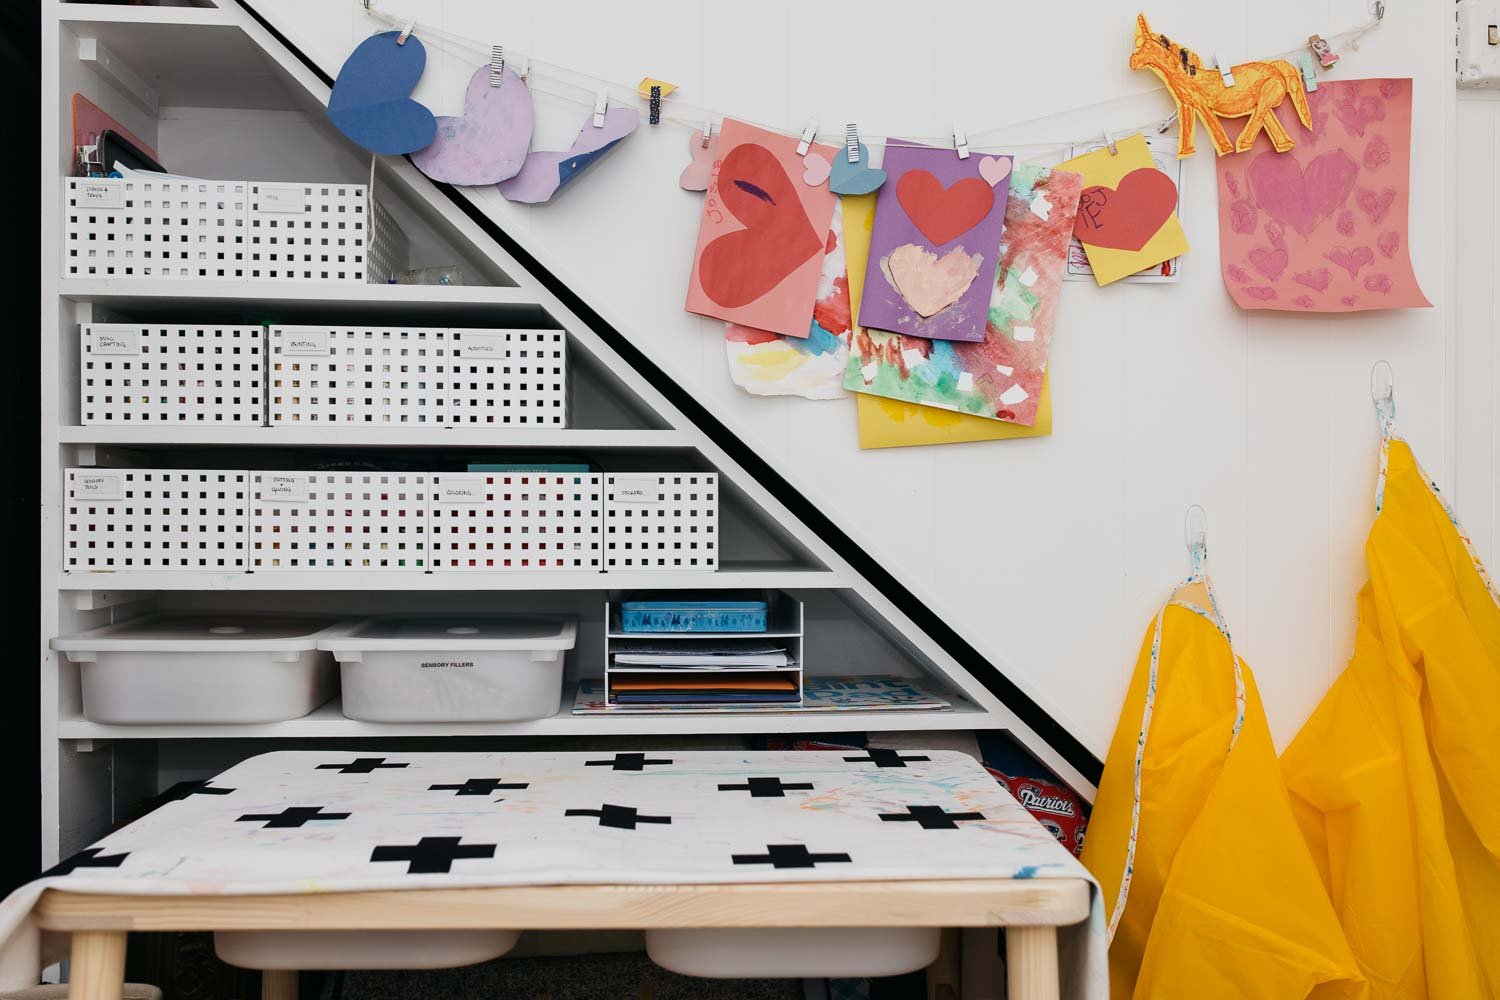 Ideas for Organizing Kids' Craft Supplies in a Small Space - embellish*ology